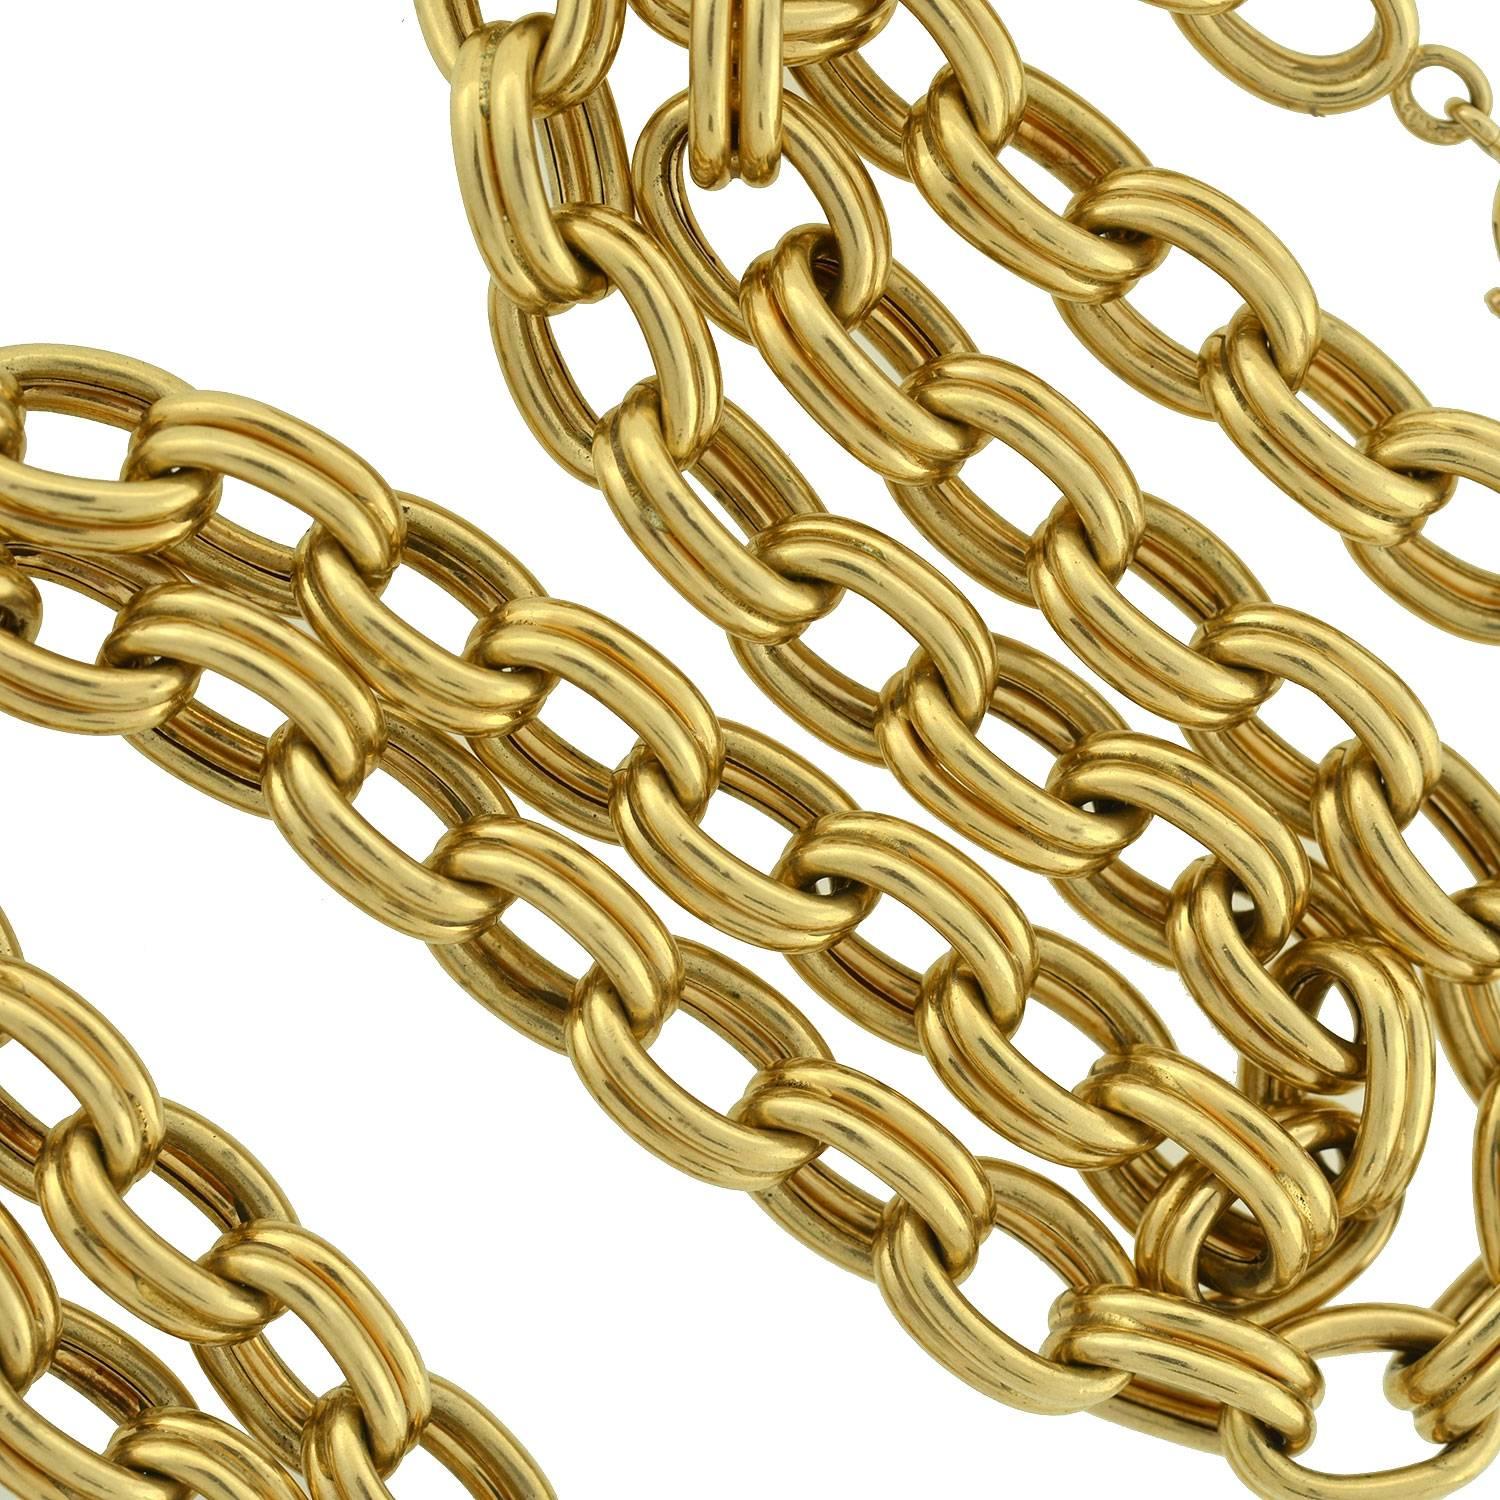 A fabulous vintage Krementz gold link chain from the 1950's! Made of vibrant 14kt yellow gold, the piece is comprised of large interlocking oval-shaped links, which connect to one another to form an attractive necklace. Each link is formed by two